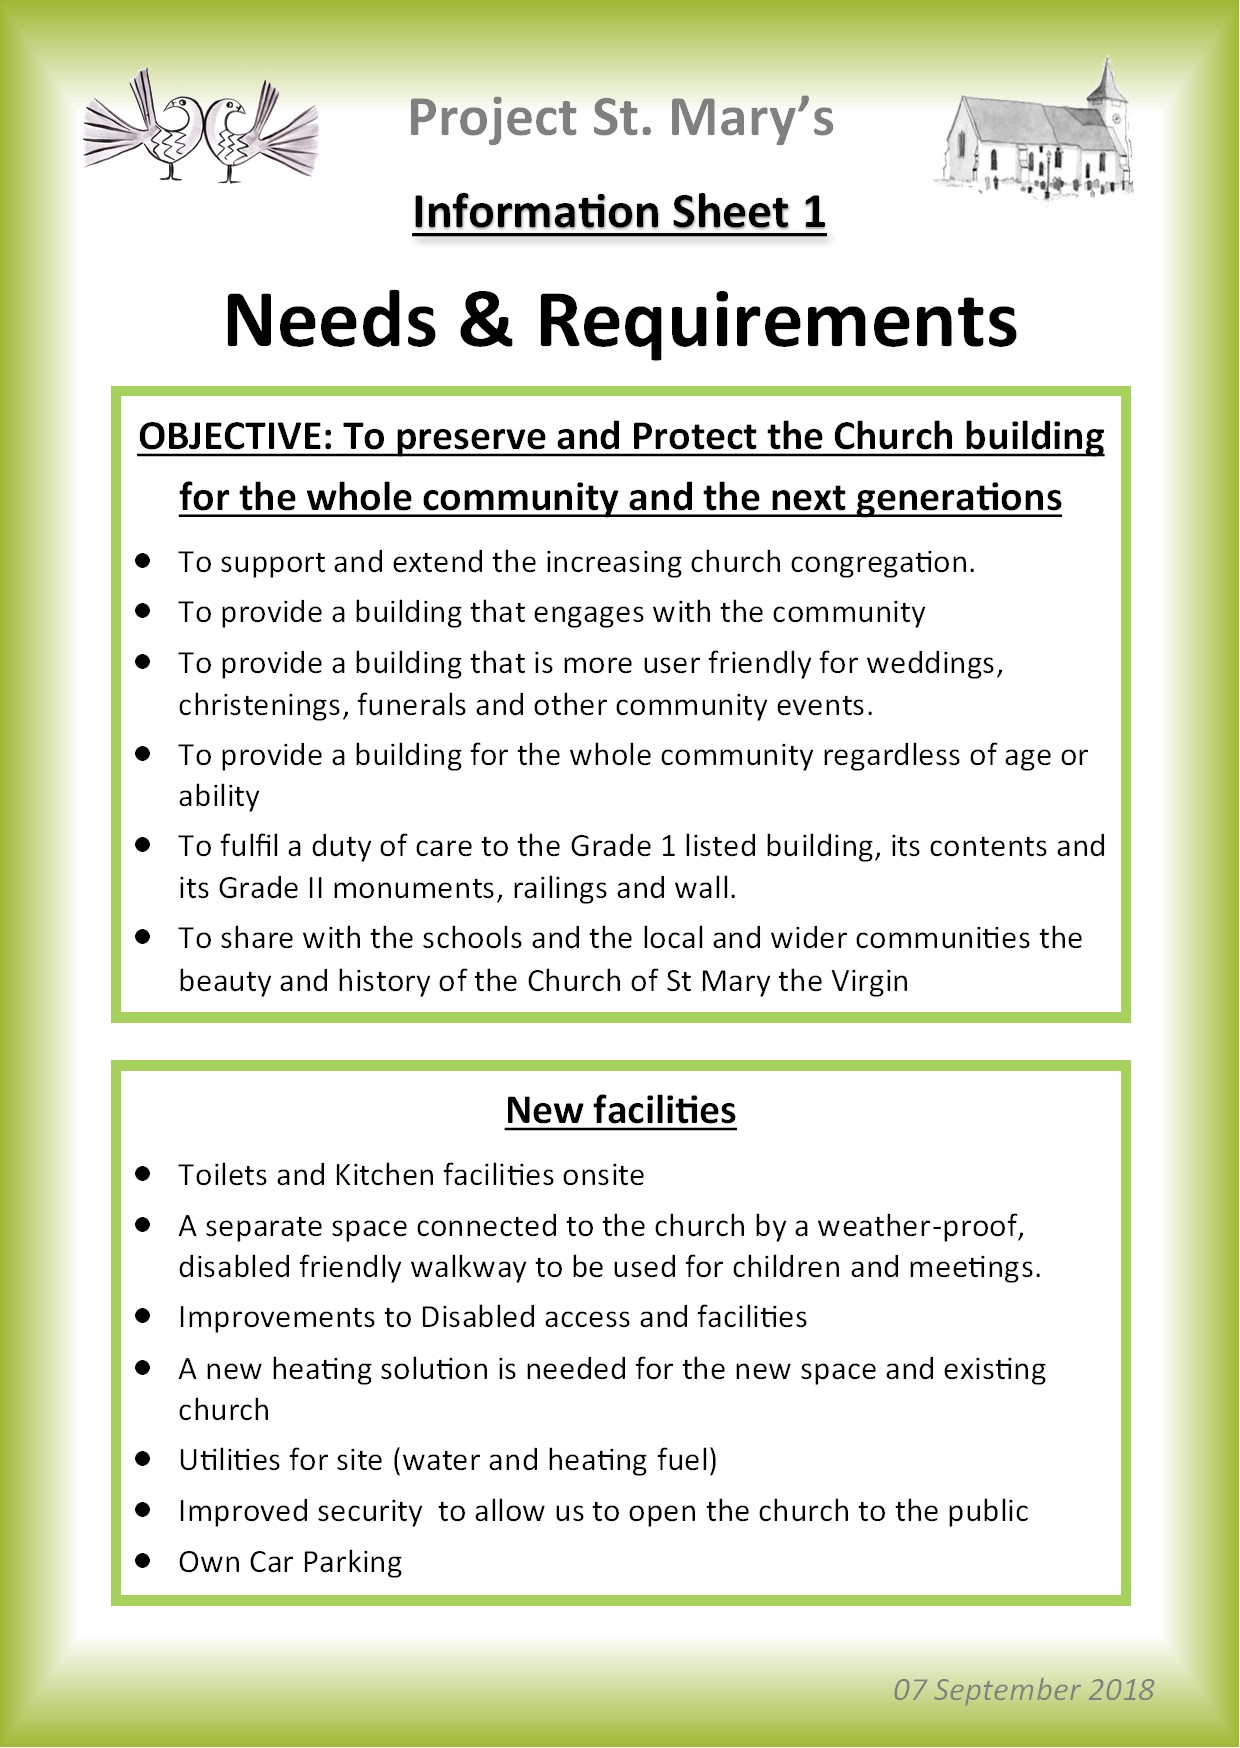 Needs & Requirements - side 1